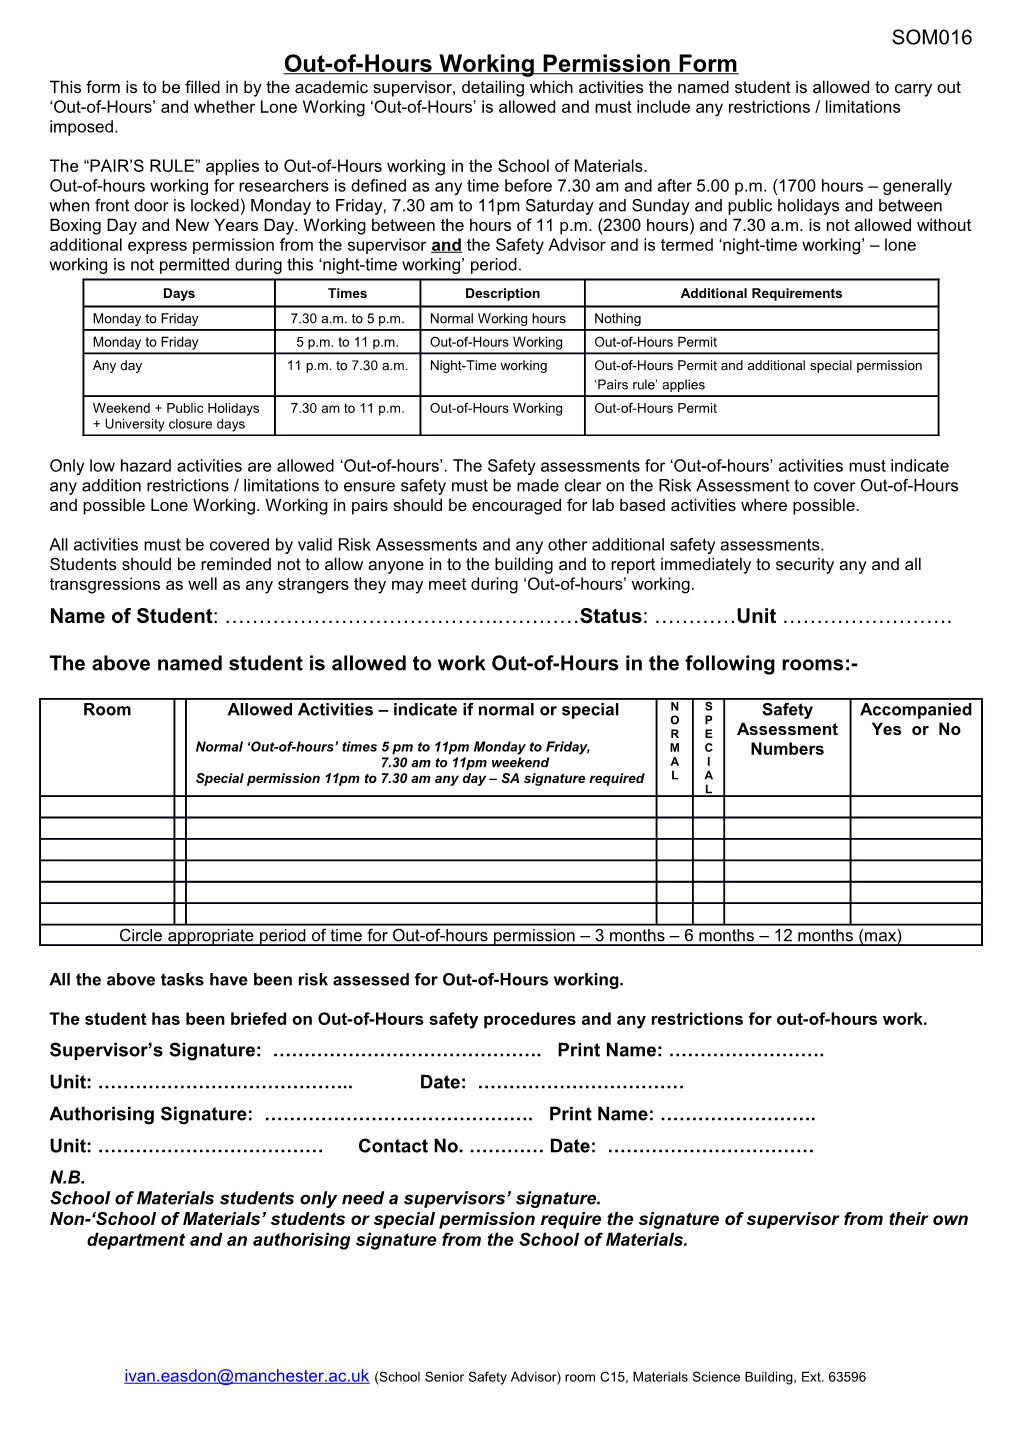 Permission Form for Out-Of-Hours Permit